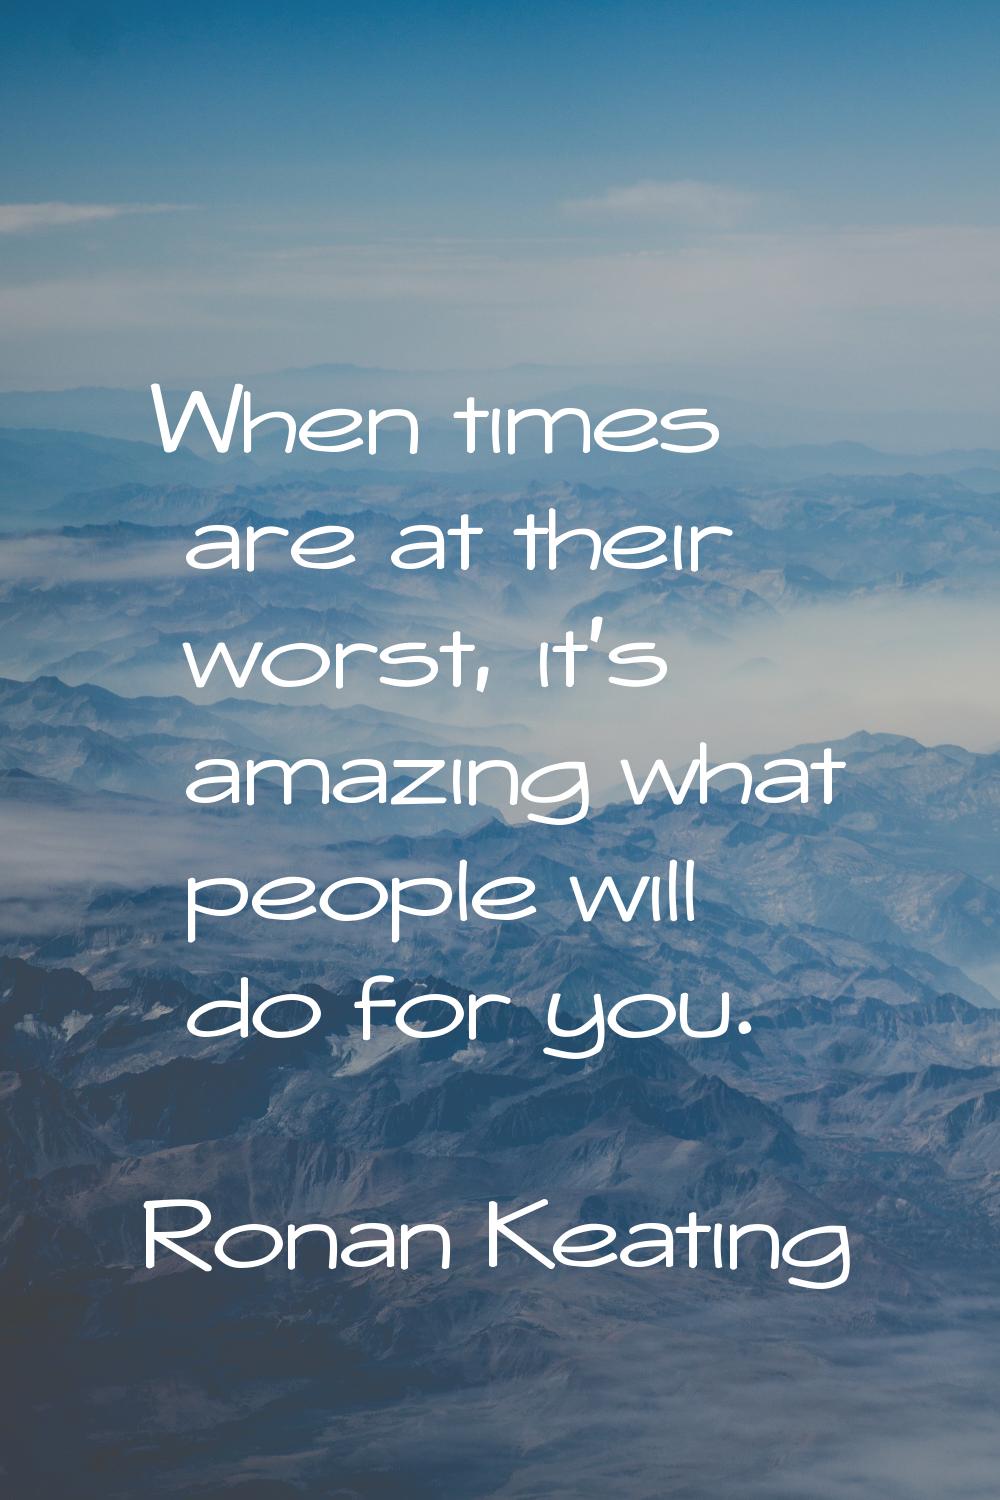 When times are at their worst, it's amazing what people will do for you.